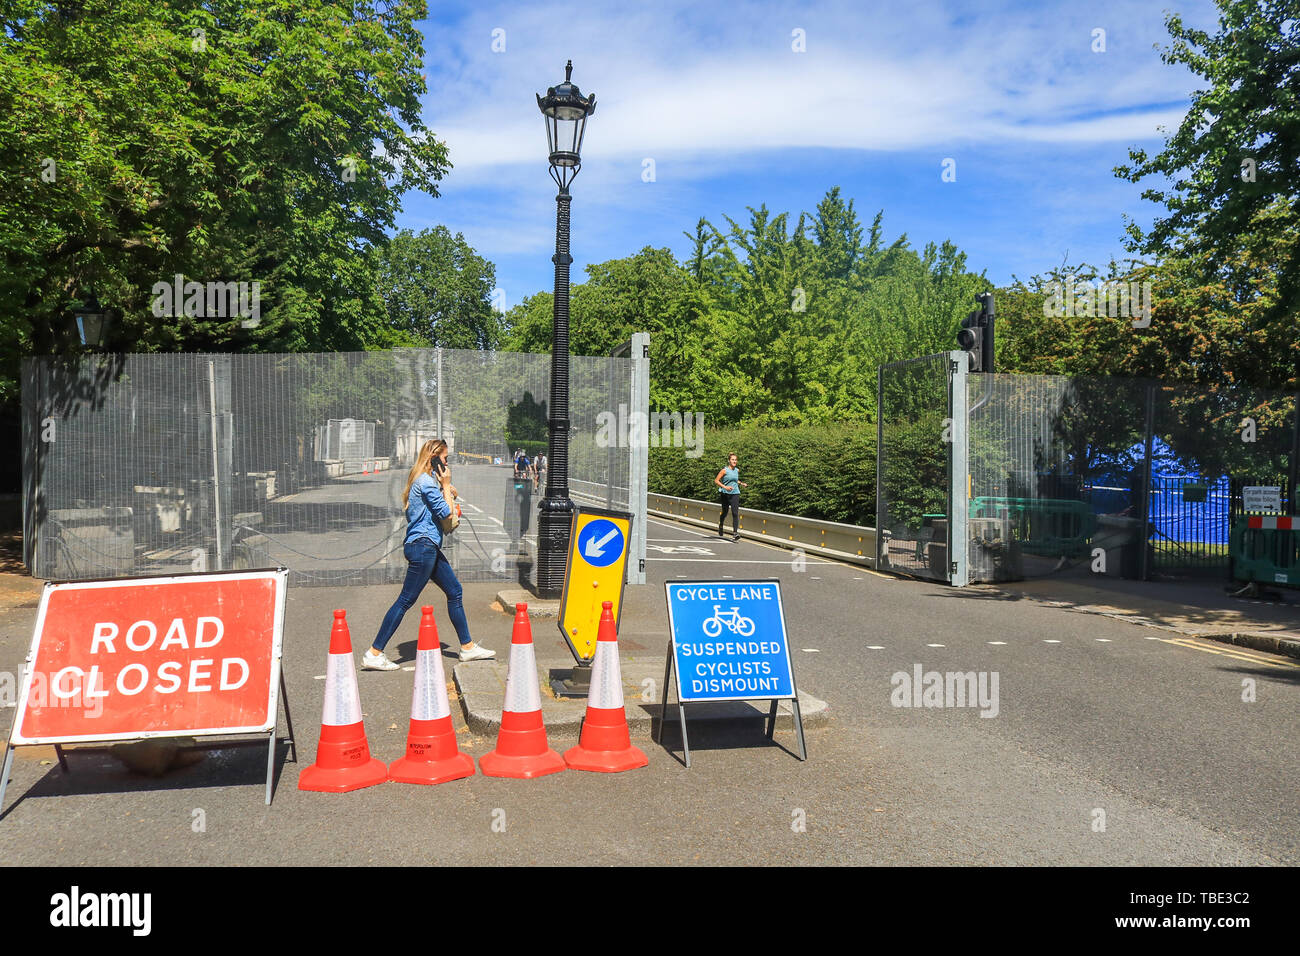 London UK. 1st June 2019. High steel security fences are erected around the perimeter of the American Ambassador's residence at Winfield House in Regent's  Park ahead of the State Visit of US President Donald Trump London UK. 1st June 2019. The minaret of  Regent's Park mosque seen next to security fences which have been installed around Winfield House residence of the Ambassador of the United States of America in Regent's Park ahead of the State Visit of President Donald Trump Credit: amer ghazzal/Alamy Live News Stock Photo